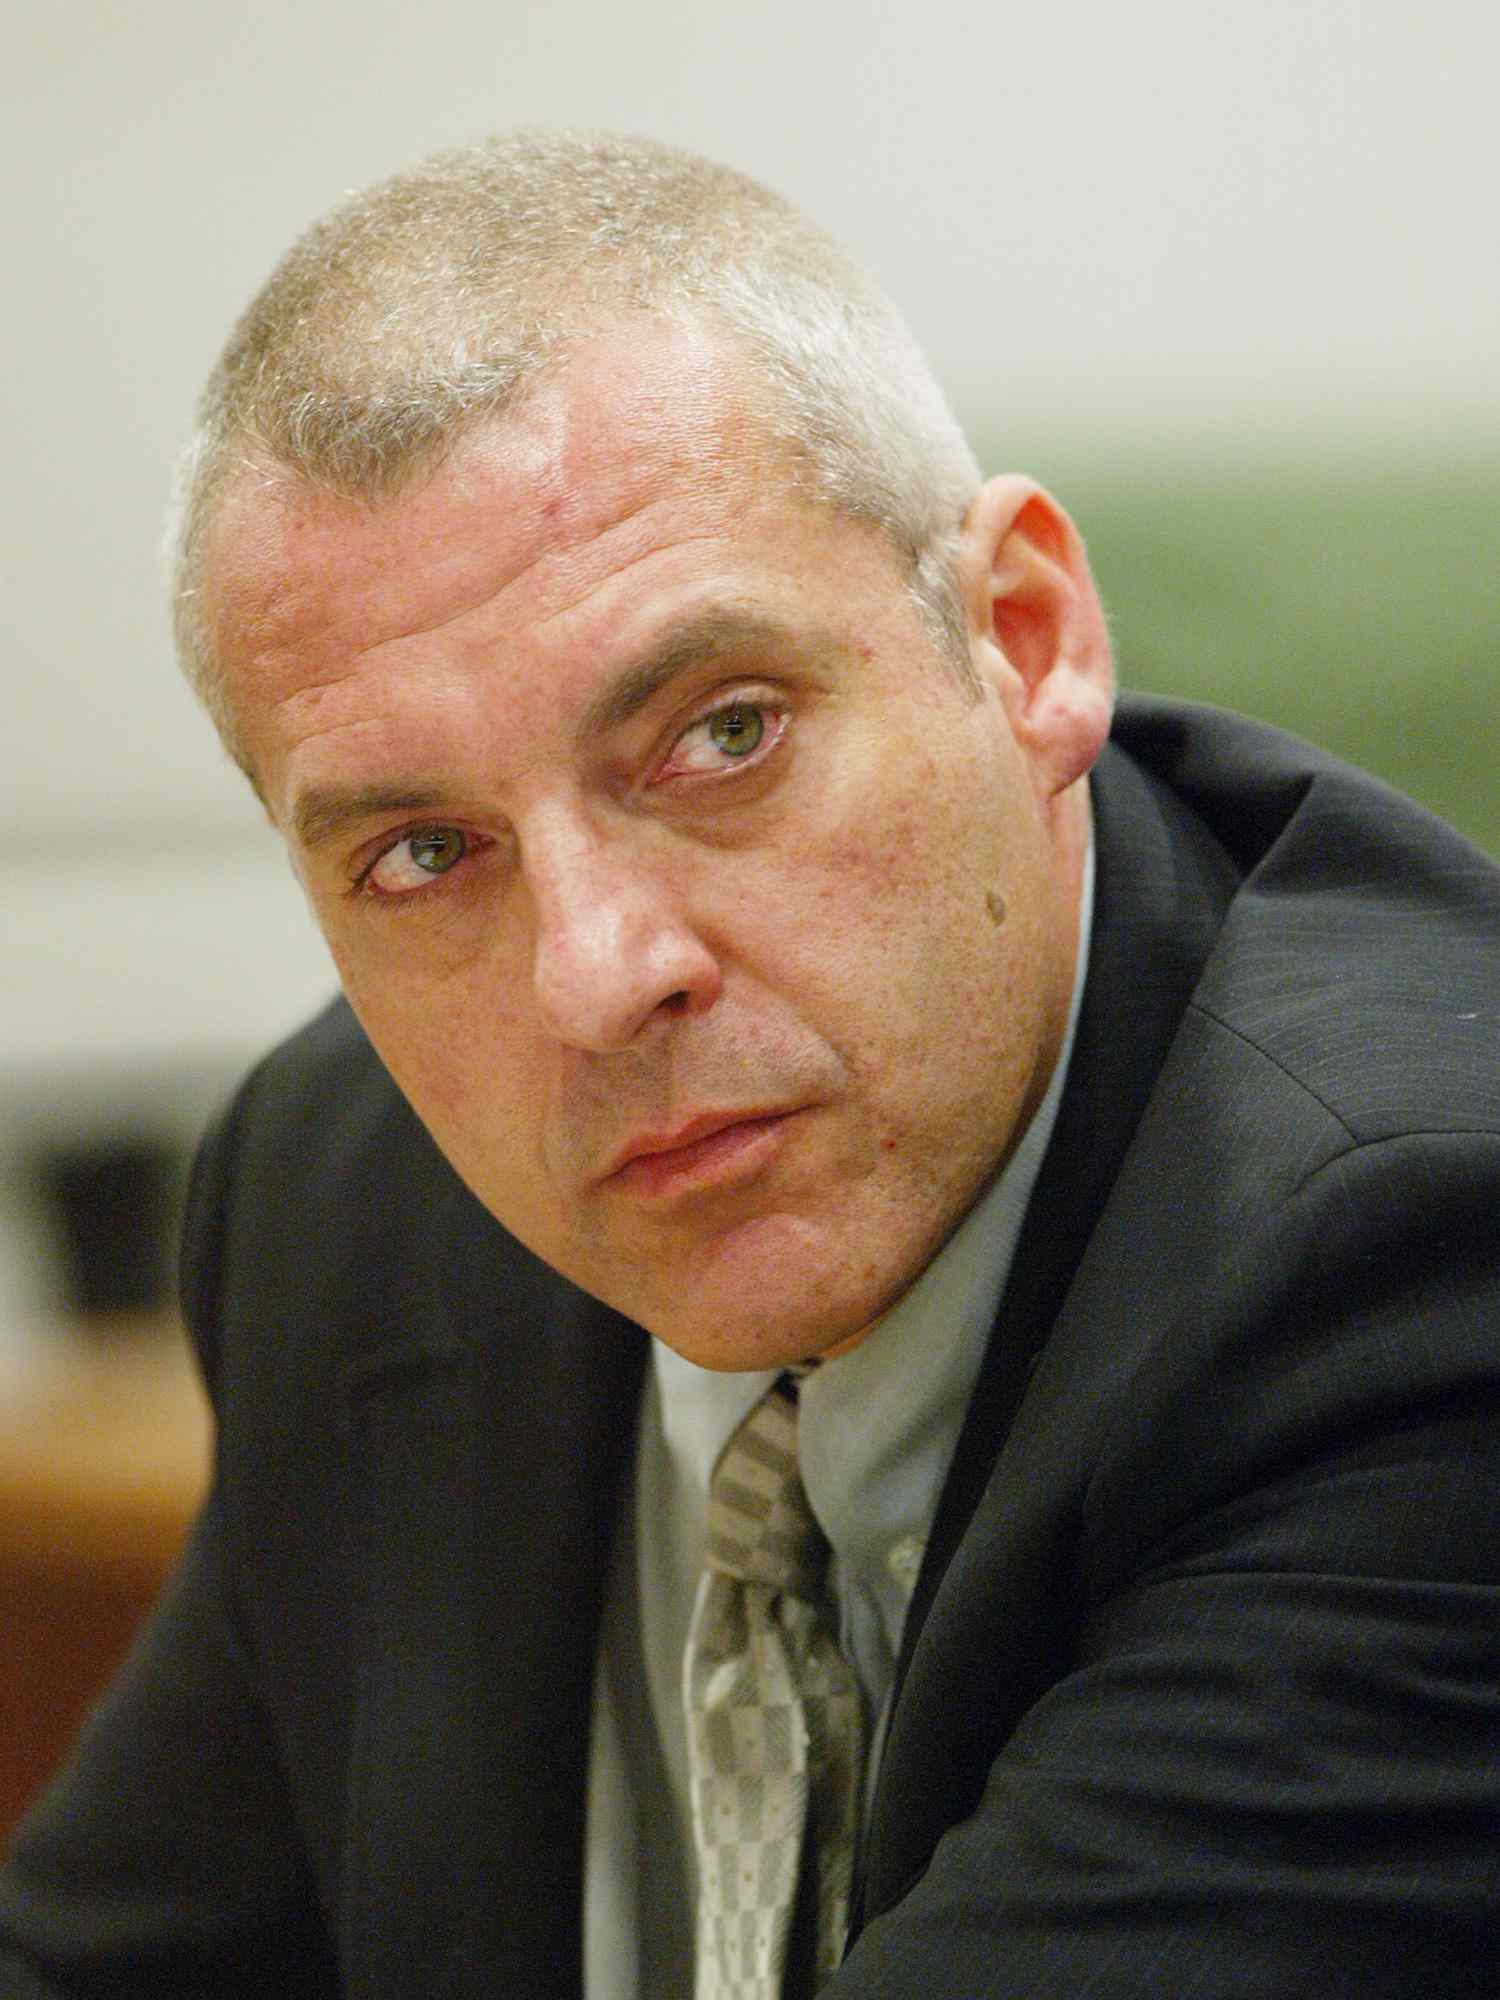 Tom Sizemore who faces 16 misdemeanor counts resulting from alleged incidents of domestic violence over the past year involing former girlfriend Heidi Fleiss listens to Fleiss' testimony at the Airport Branch Courthouse, August 6th, 2003 in Los Angeles, California